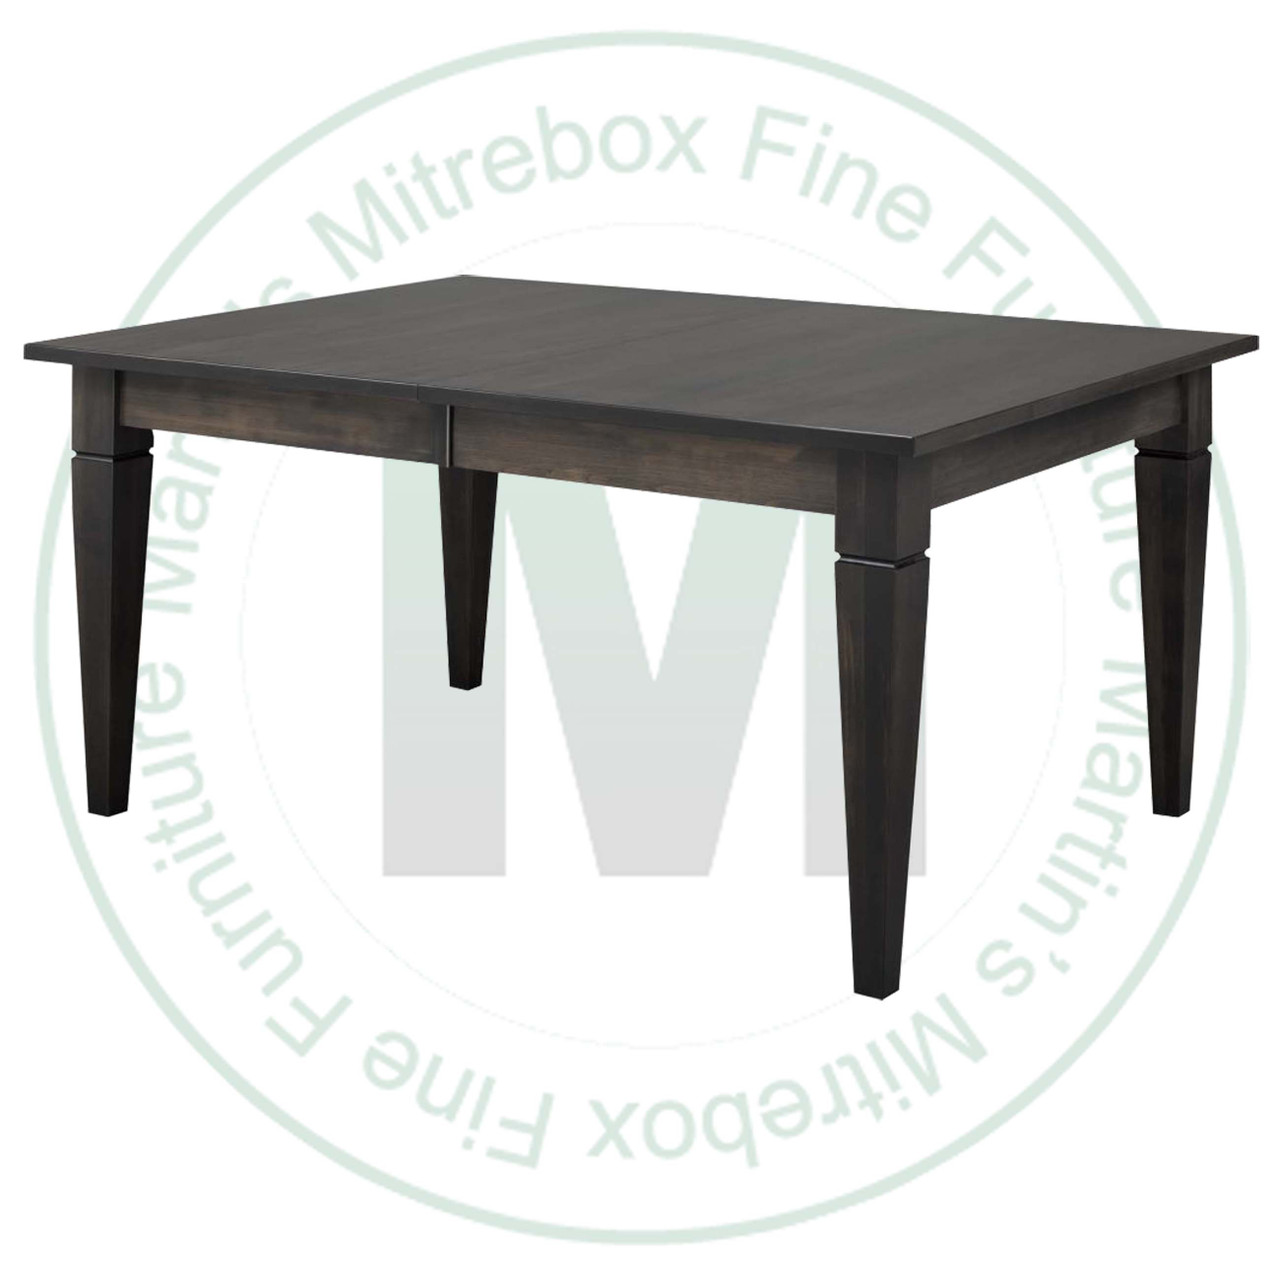 Maple Reesor Solid Top Harvest Table 36''D x 72''W x 30''H Table Has 1'' Thick Top And 2 - 16'' Extensions